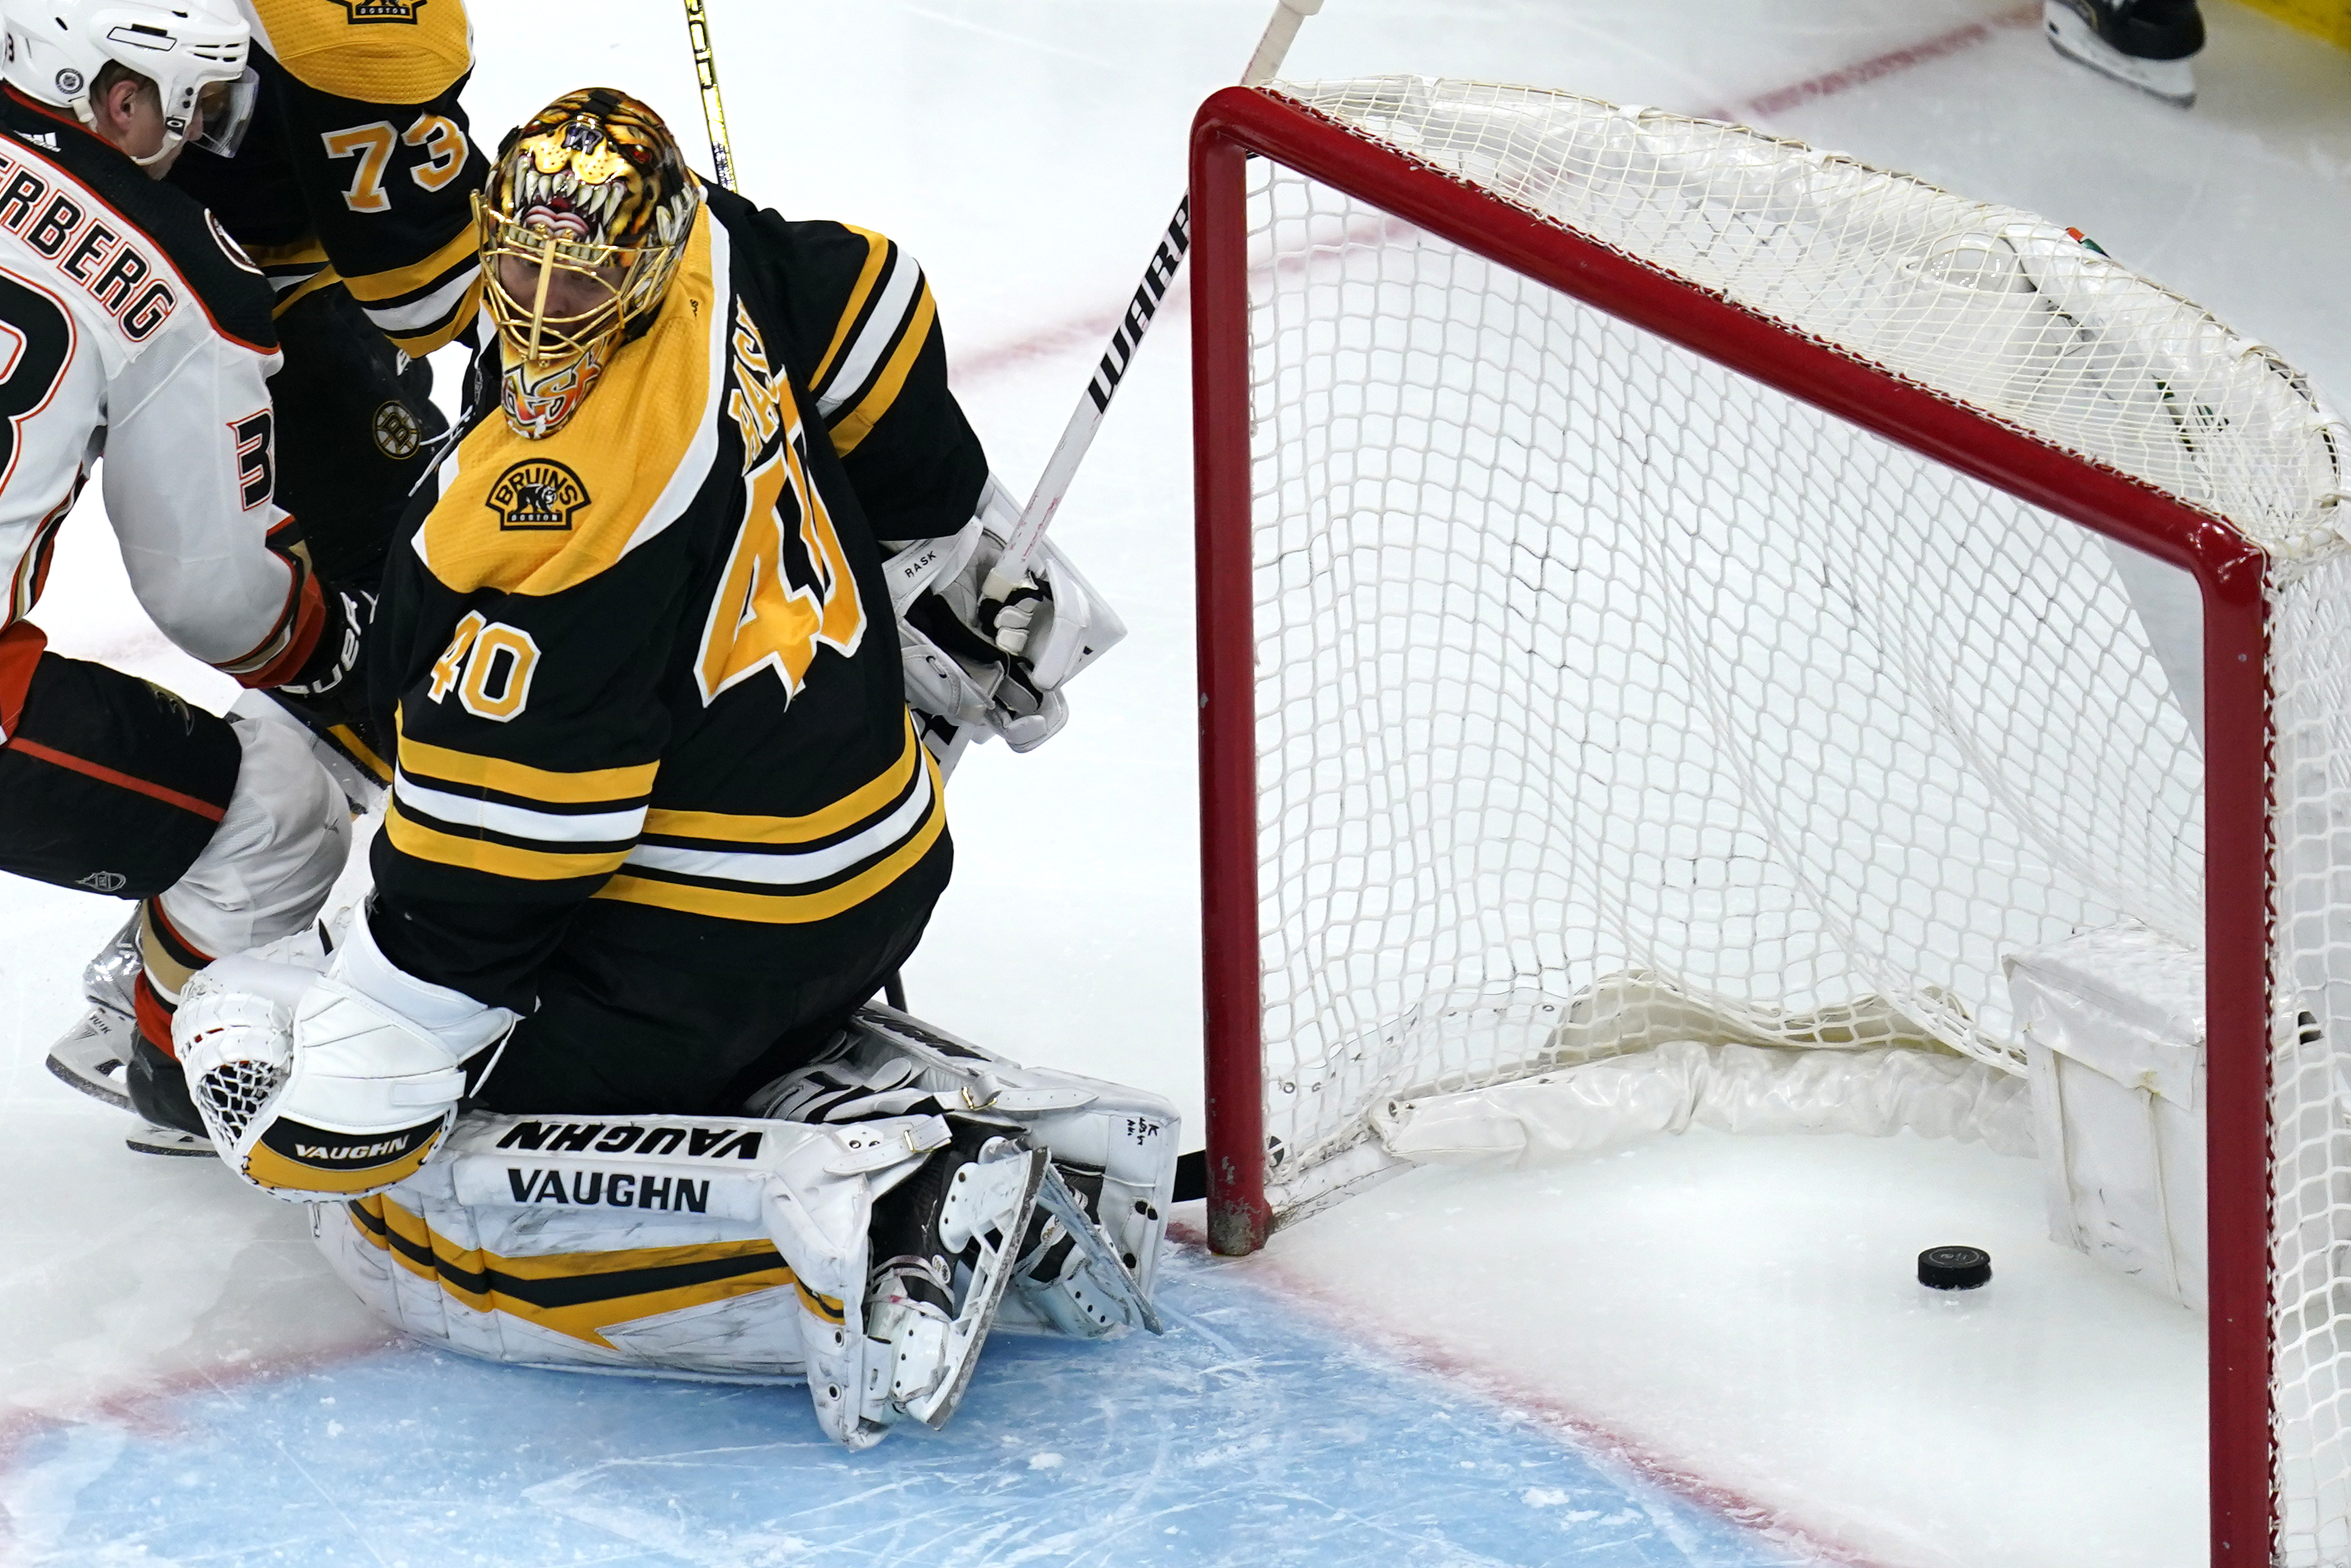 Support for Tuukka Rask to Hall of Fame is puzzling